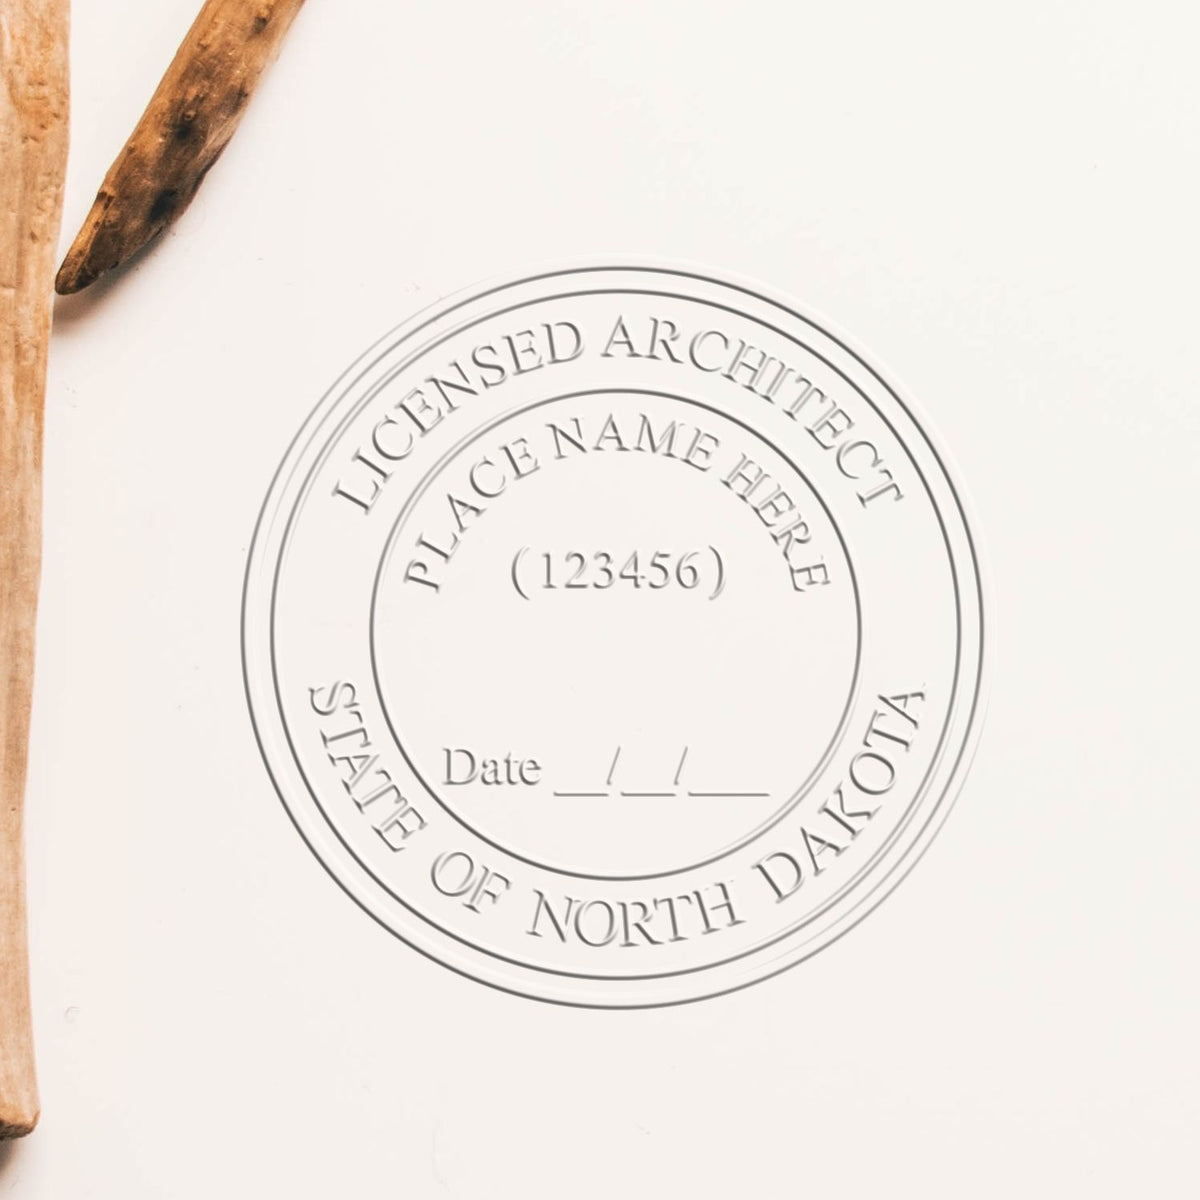 The State of North Dakota Architectural Seal Embosser stamp impression comes to life with a crisp, detailed photo on paper - showcasing true professional quality.